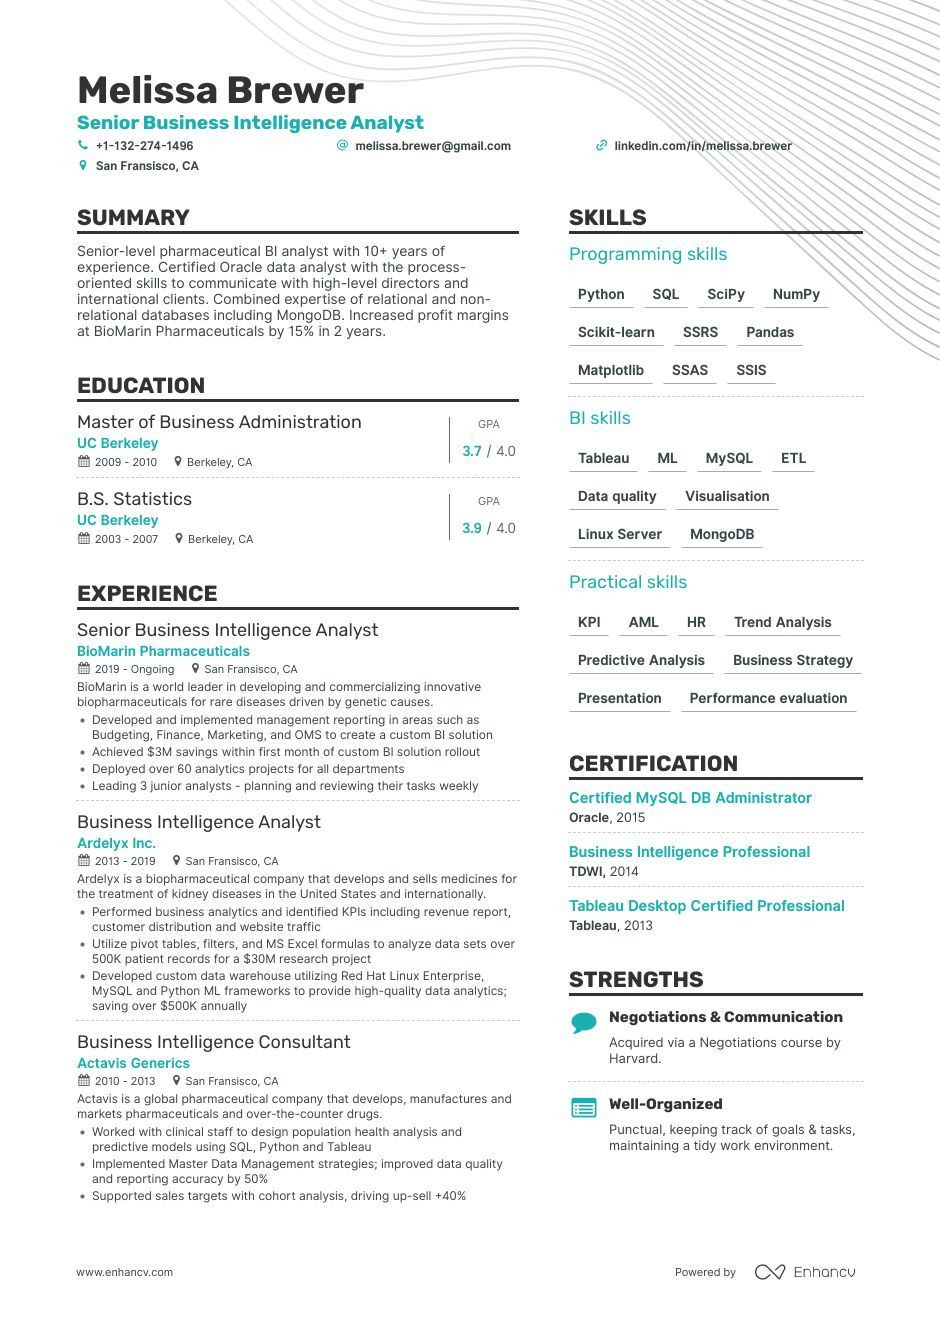 Sample Resume with Etl Developer Job Duties In Insurance Company Business Intelligence Resume Examples   Templates & Expert Advice …